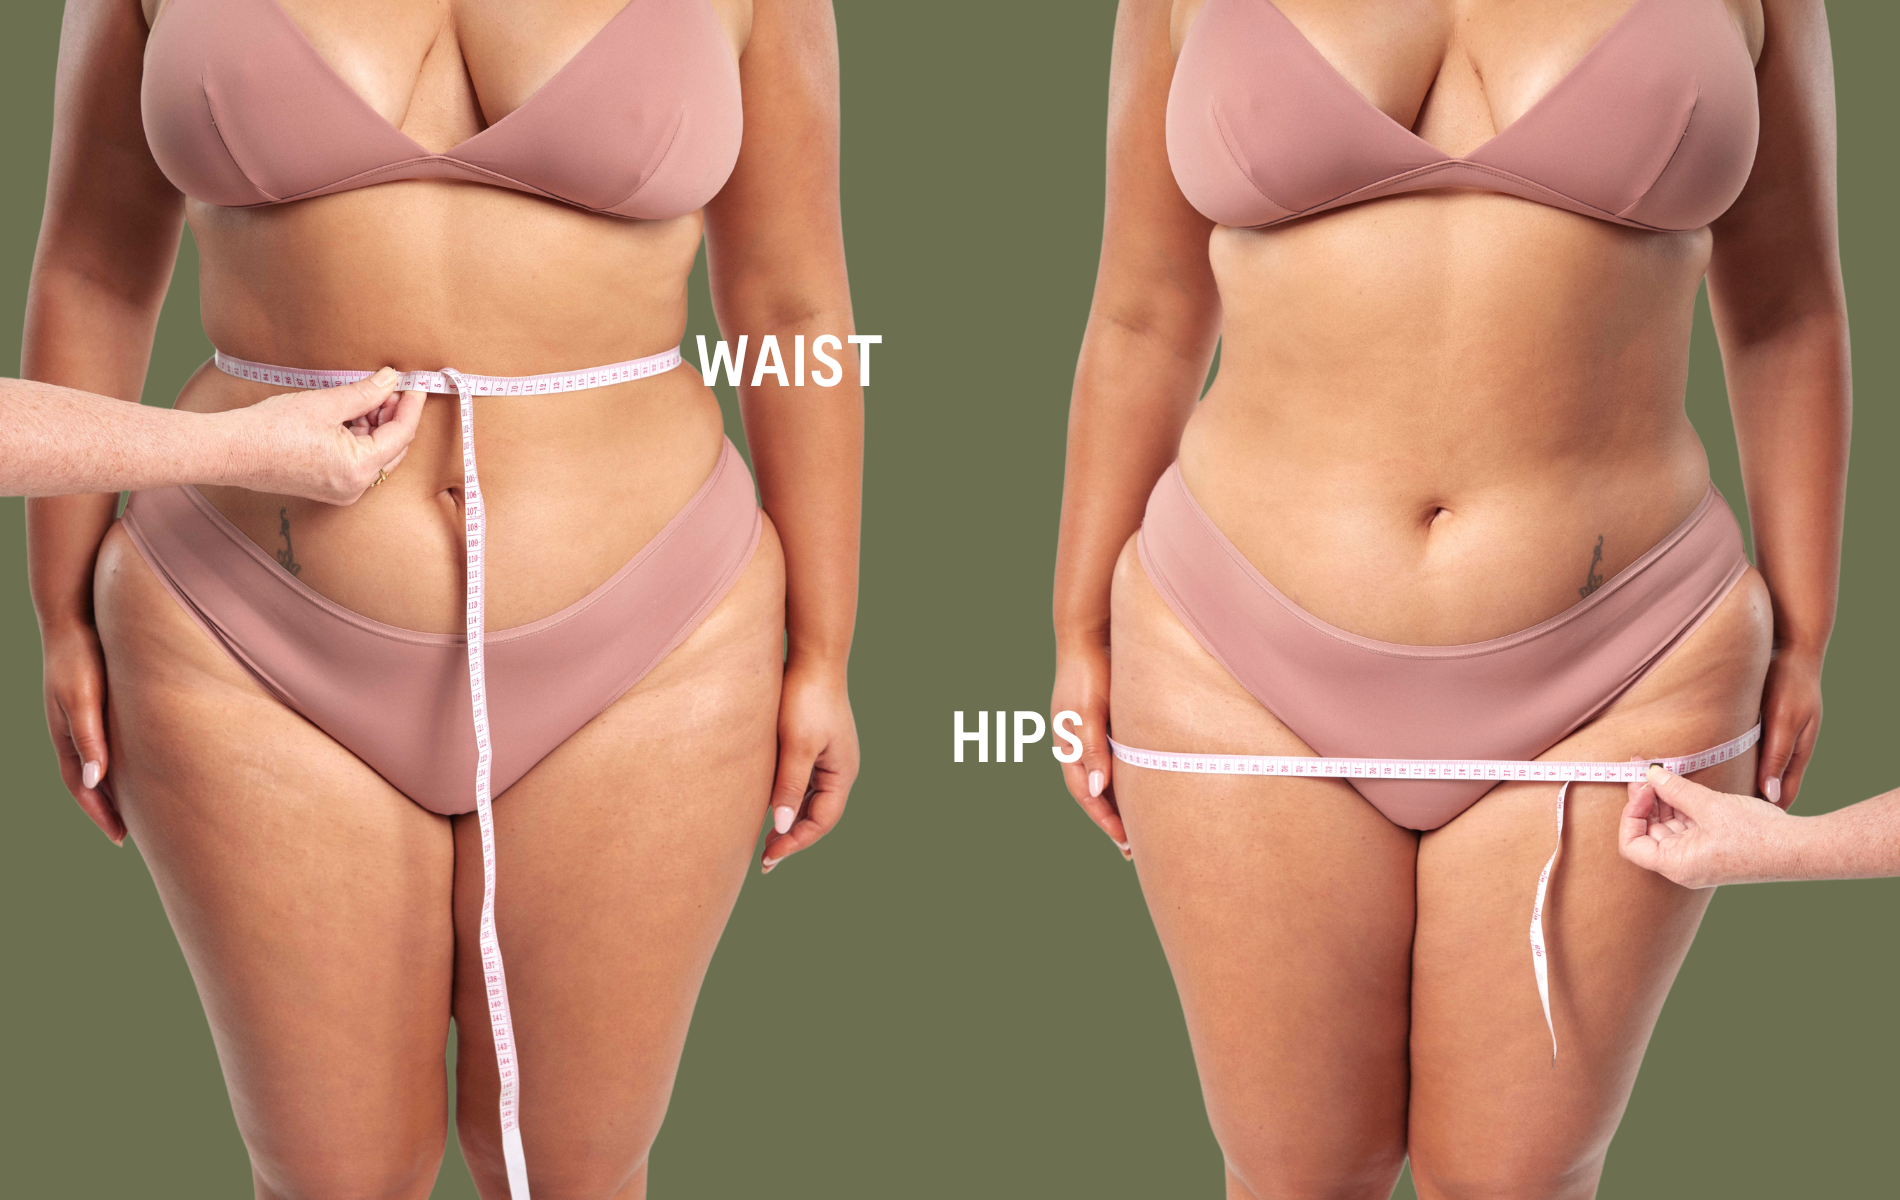 How to measure underwear hips and waist